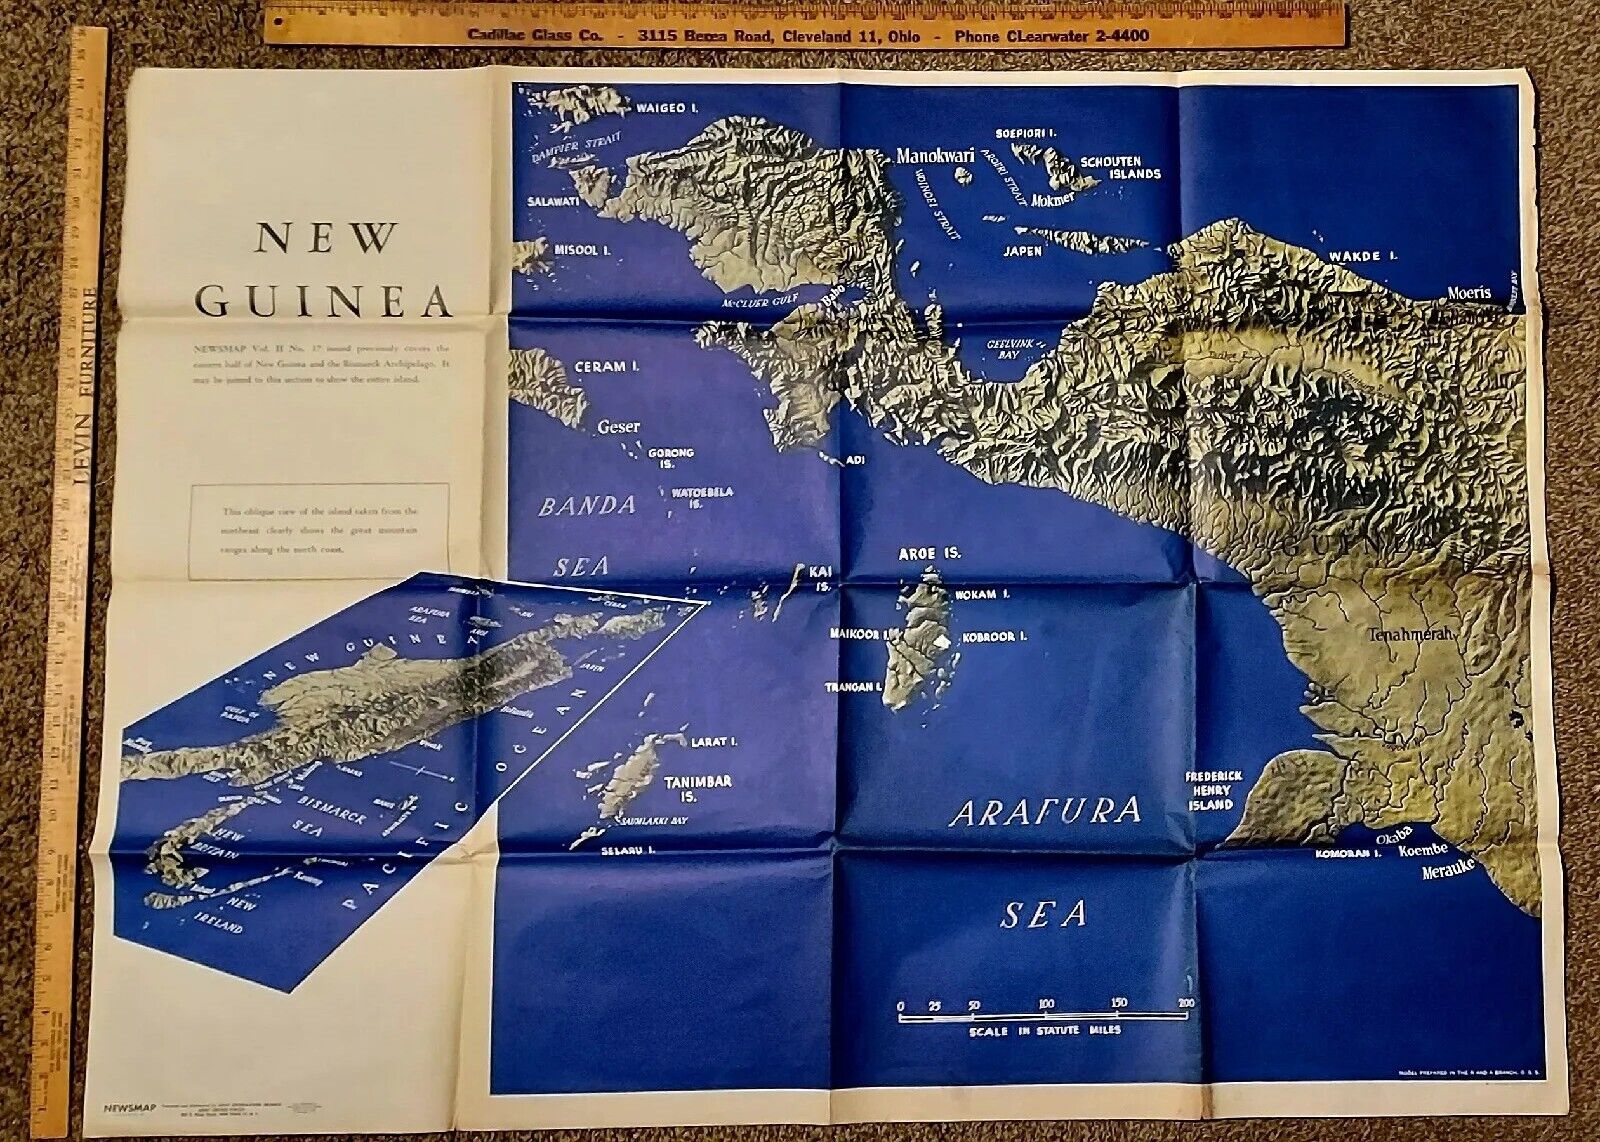 WWII NEWSMAP 1944 May Double Sided Color Volume III No 6B BIG 35 × 47 New Guinea